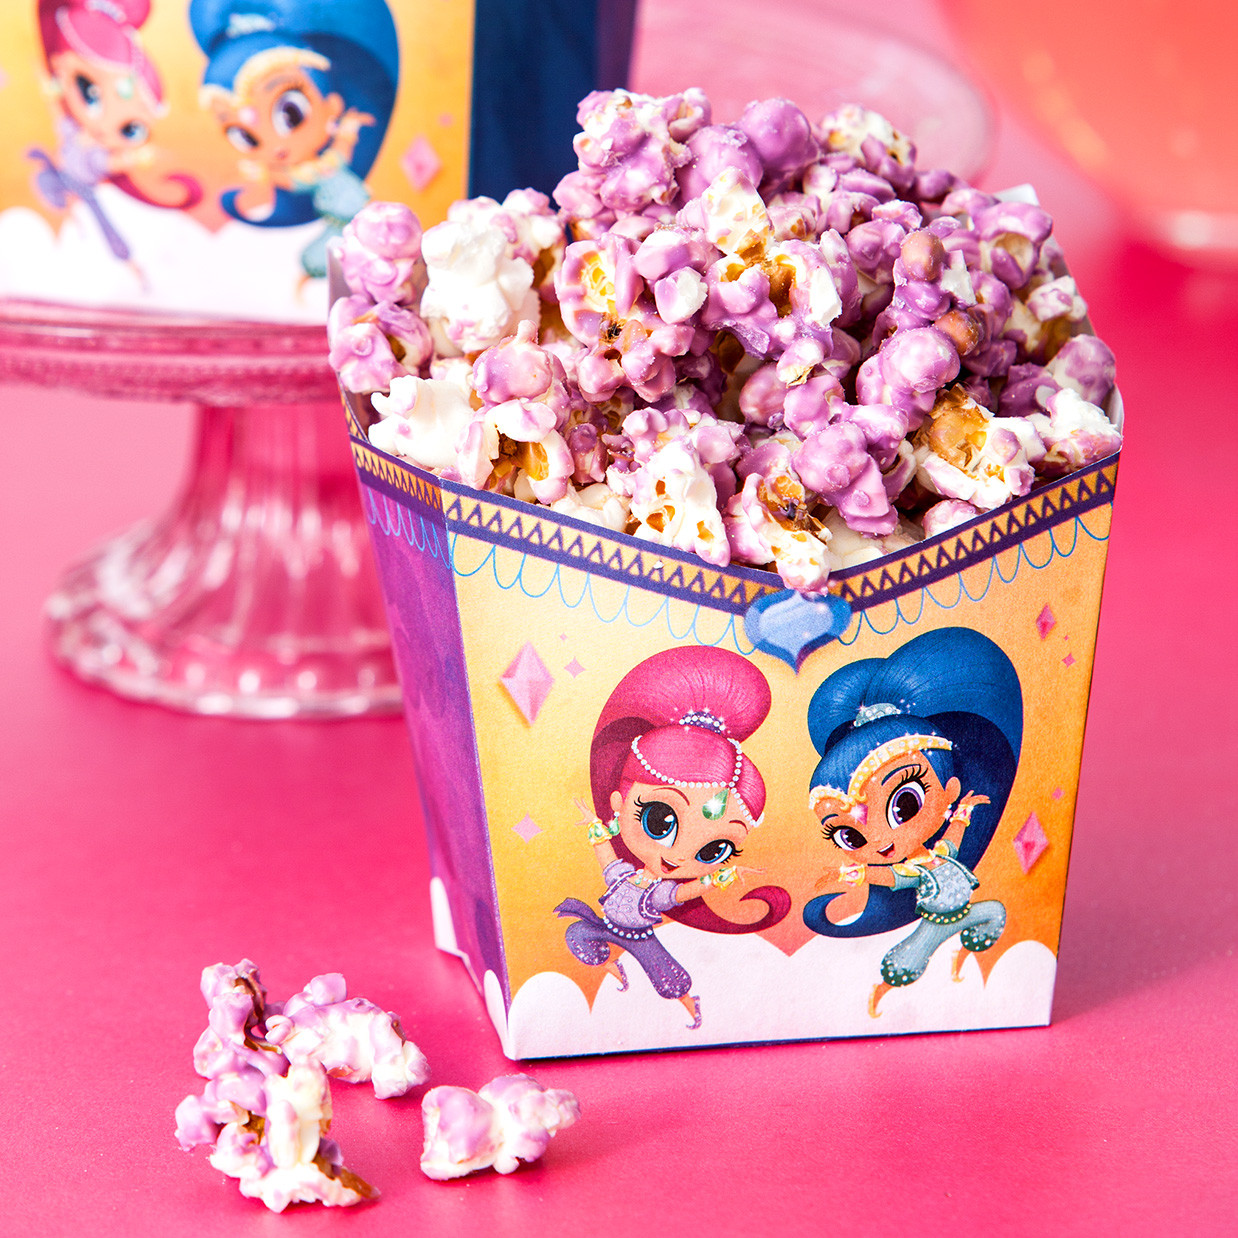 Shimmer And Shine Birthday Decorations
 Plan a Shimmer and Shine Birthday Party